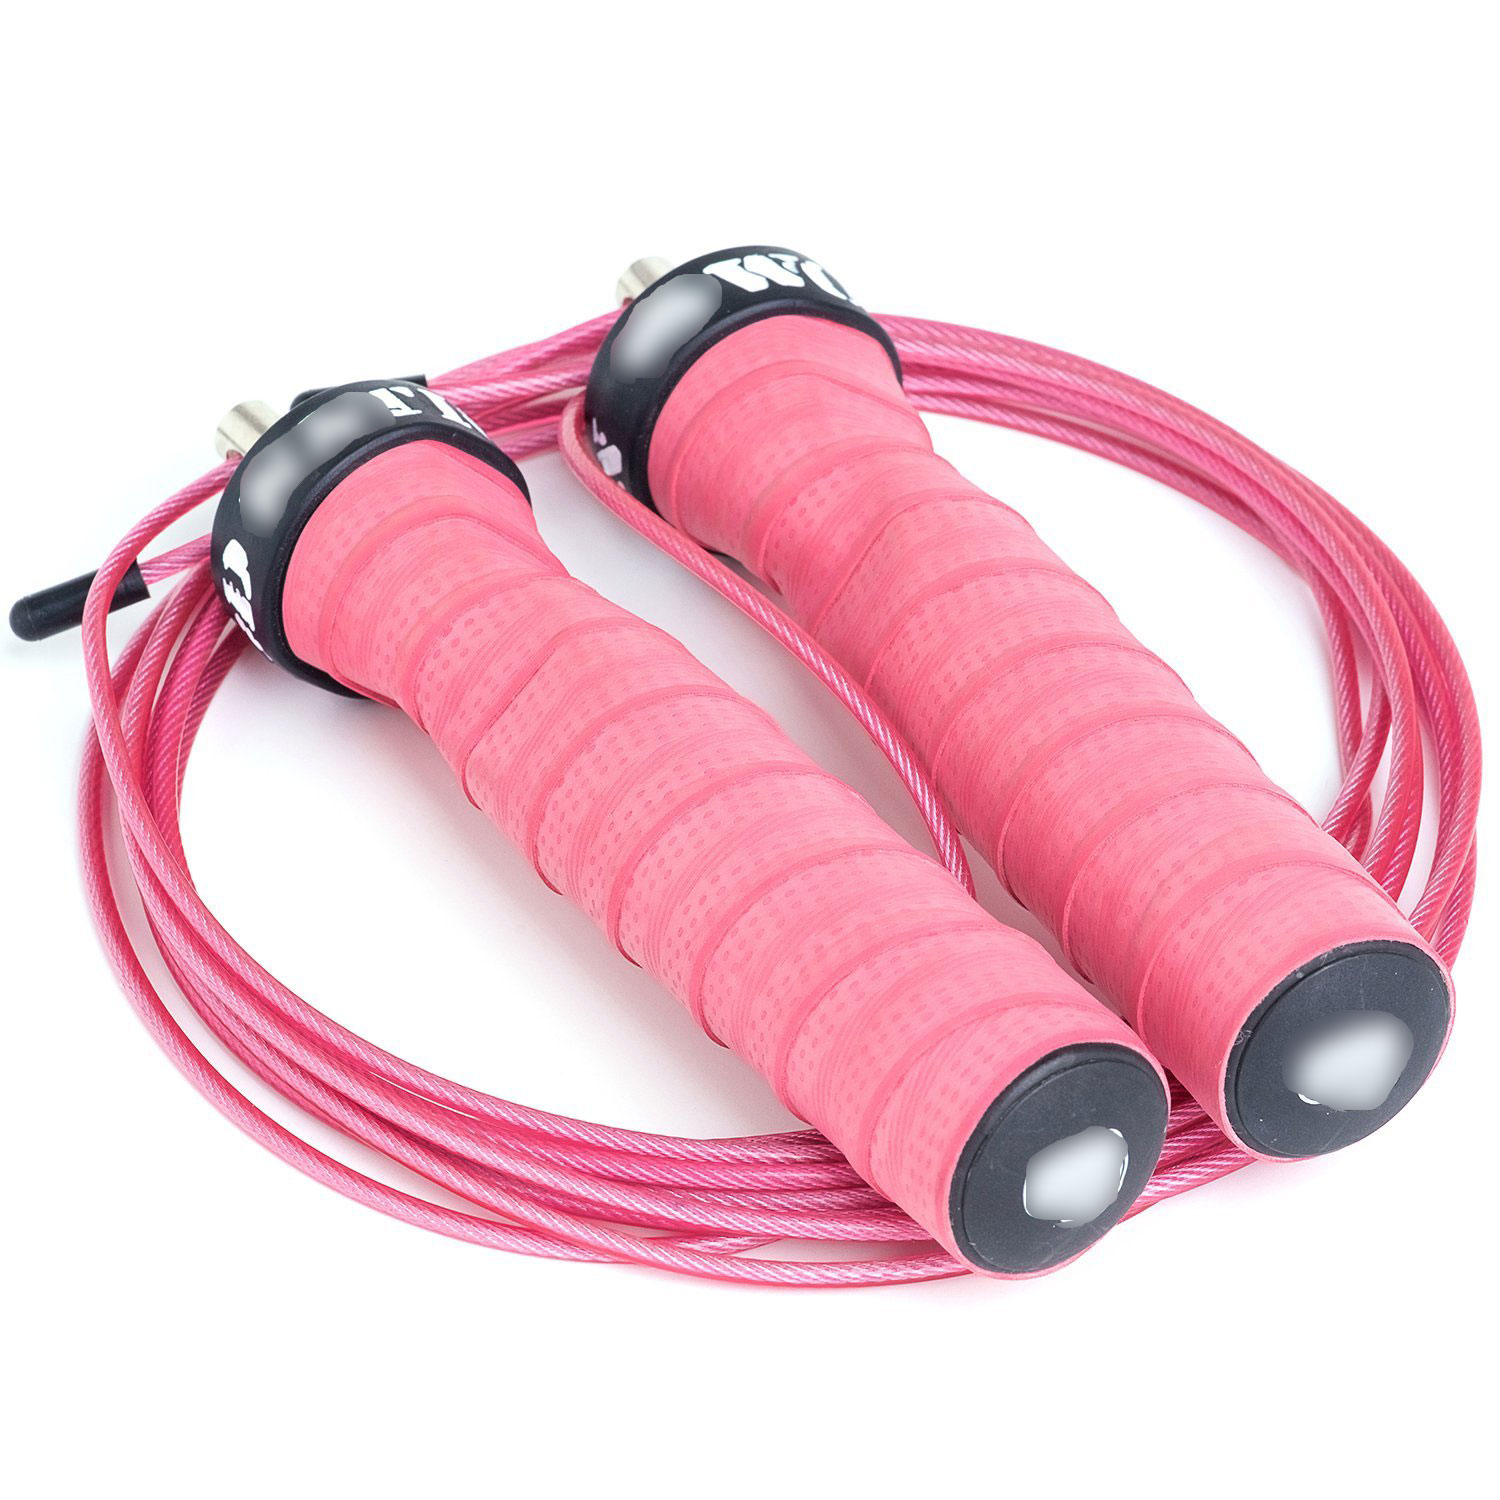 Weight loss by skipping rope